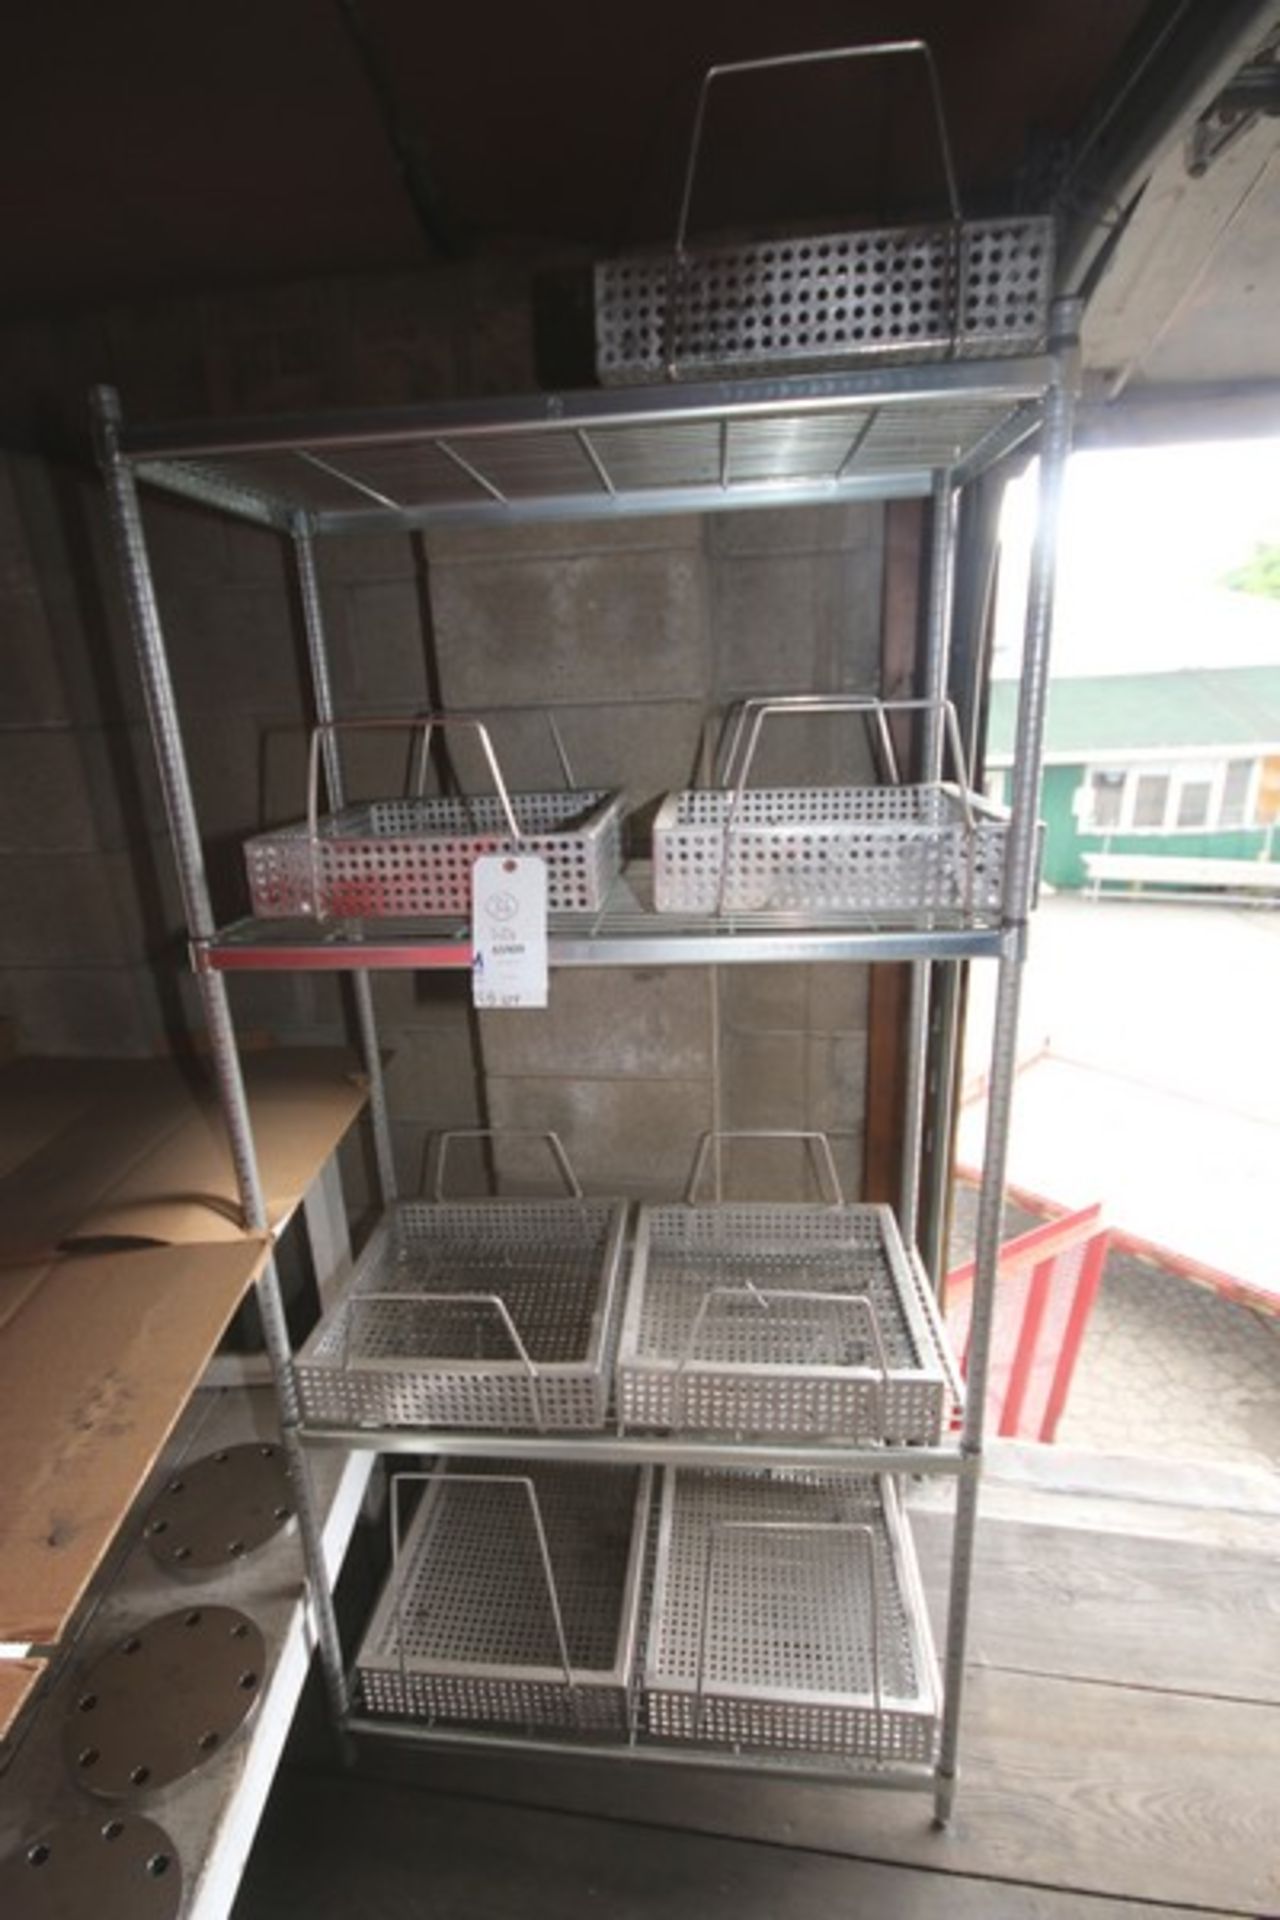 Lot of (7) 15" L x 15" W x 3" D S/S COP Wash Baskets (INV#65909)(Located at the MDG Showroom --